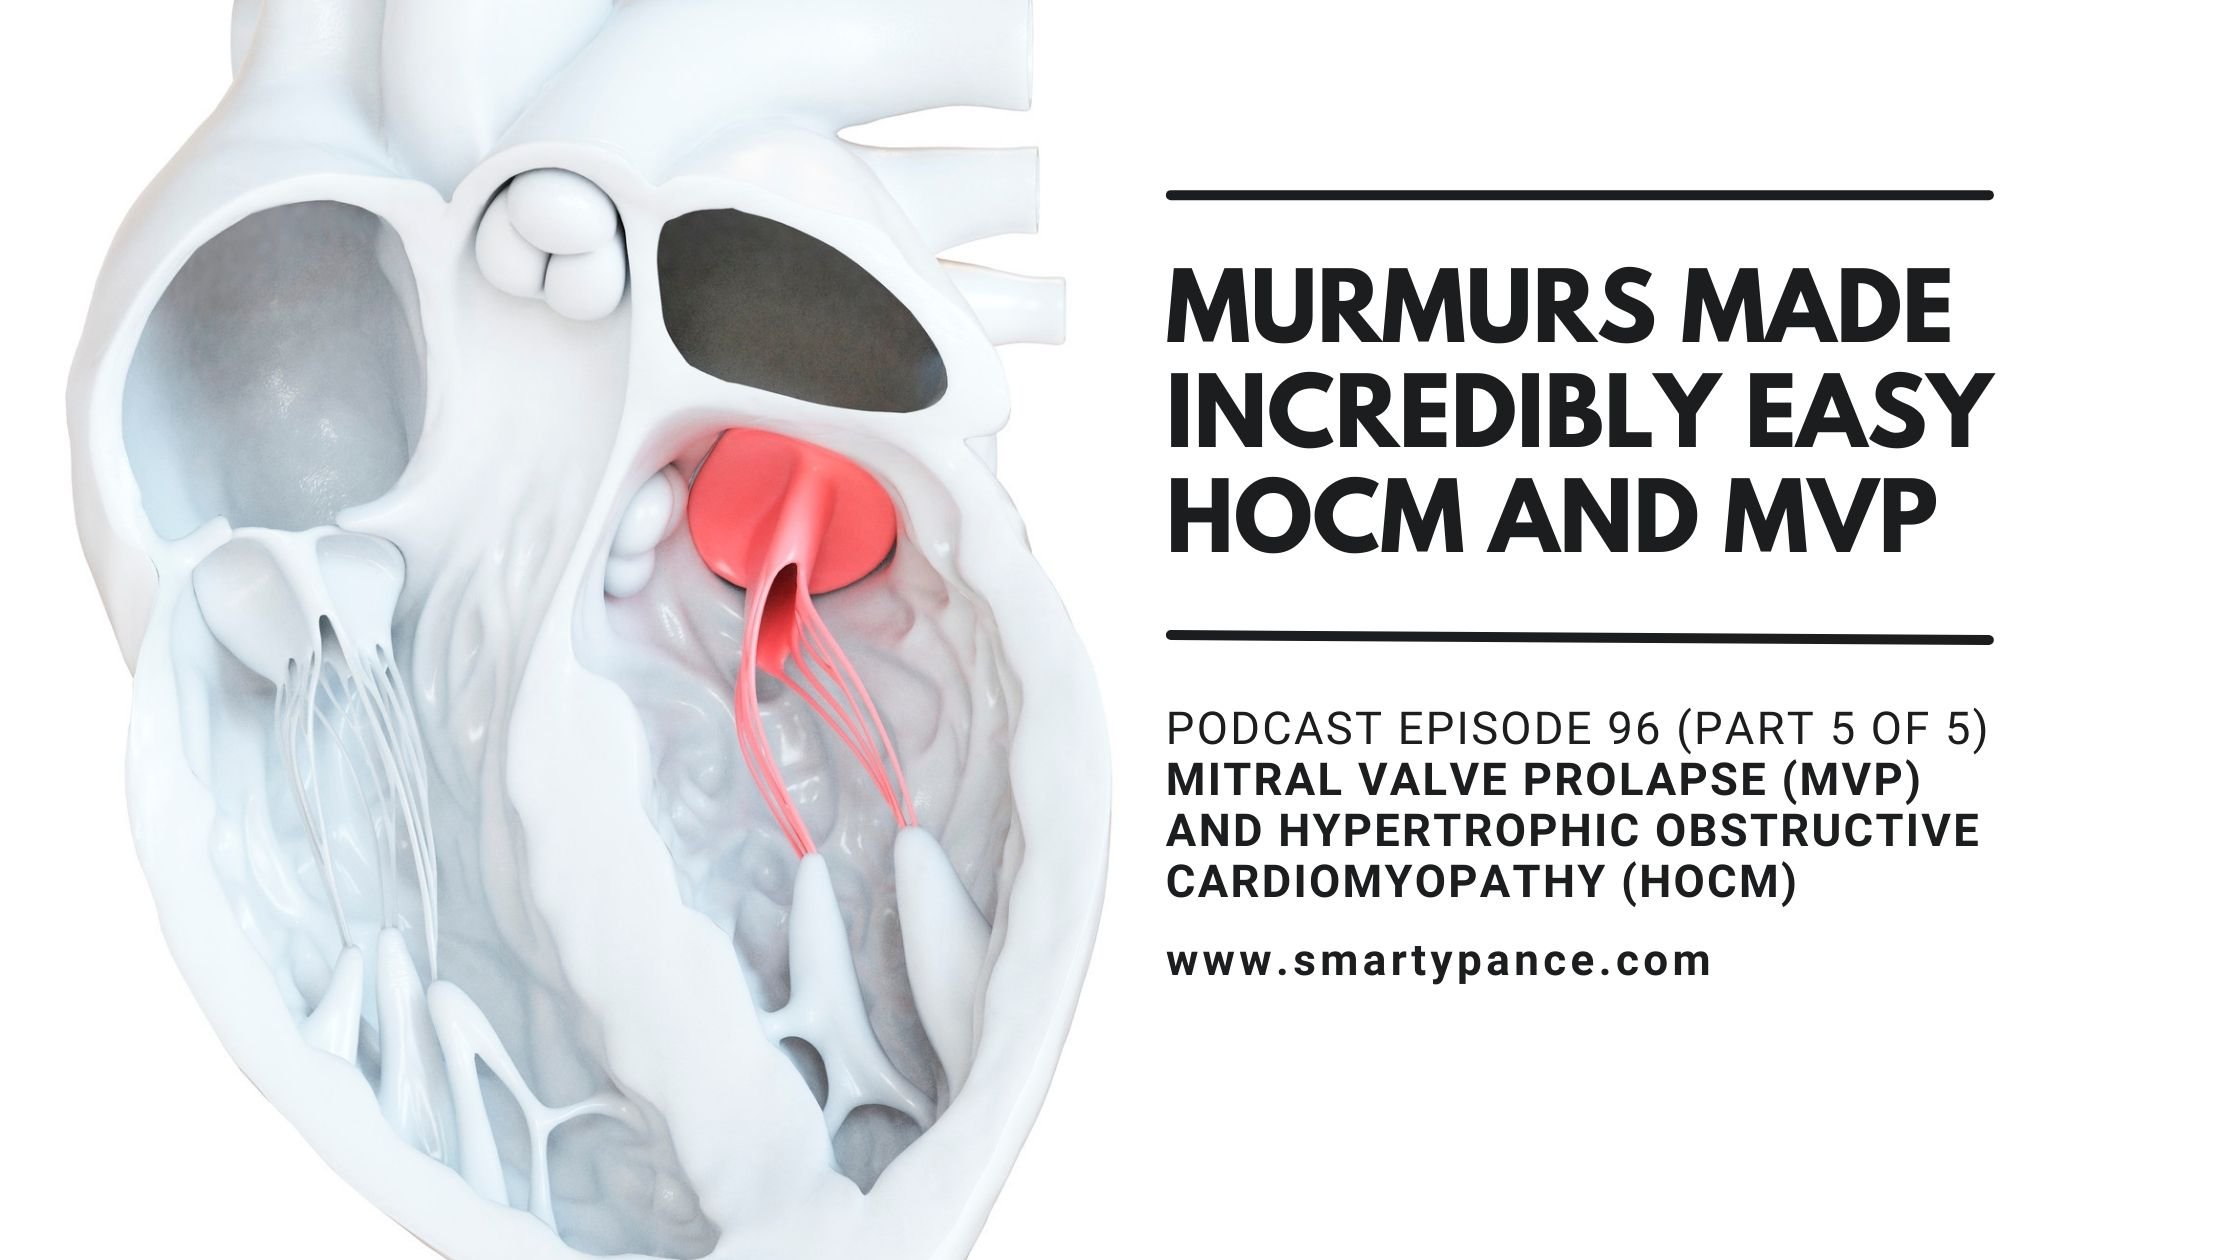 Murmurs Made Incredibly Easy - Mitral Valve Prolapse (MVP) and Hypertrophic Obstructive Cardiomyopathy (HOCM)